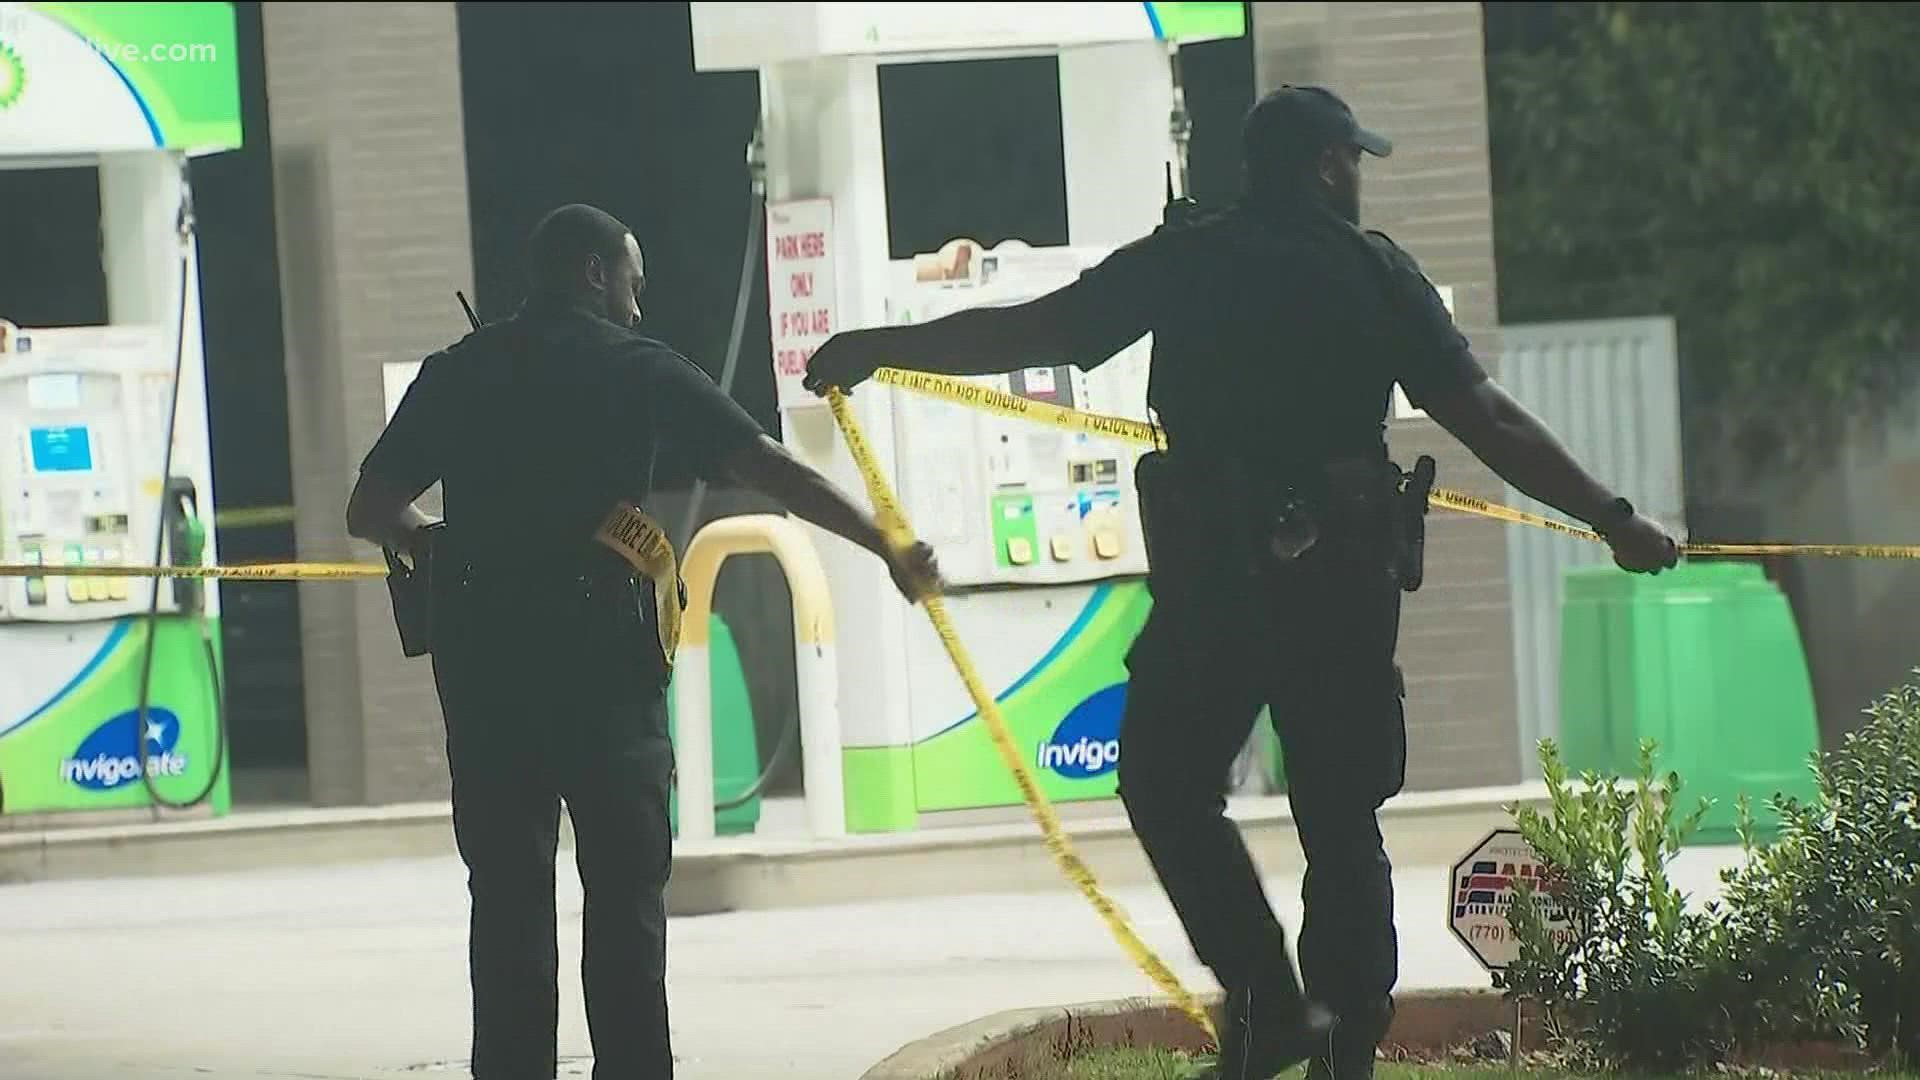 The man was shot in the shoulder at a BP gas station.